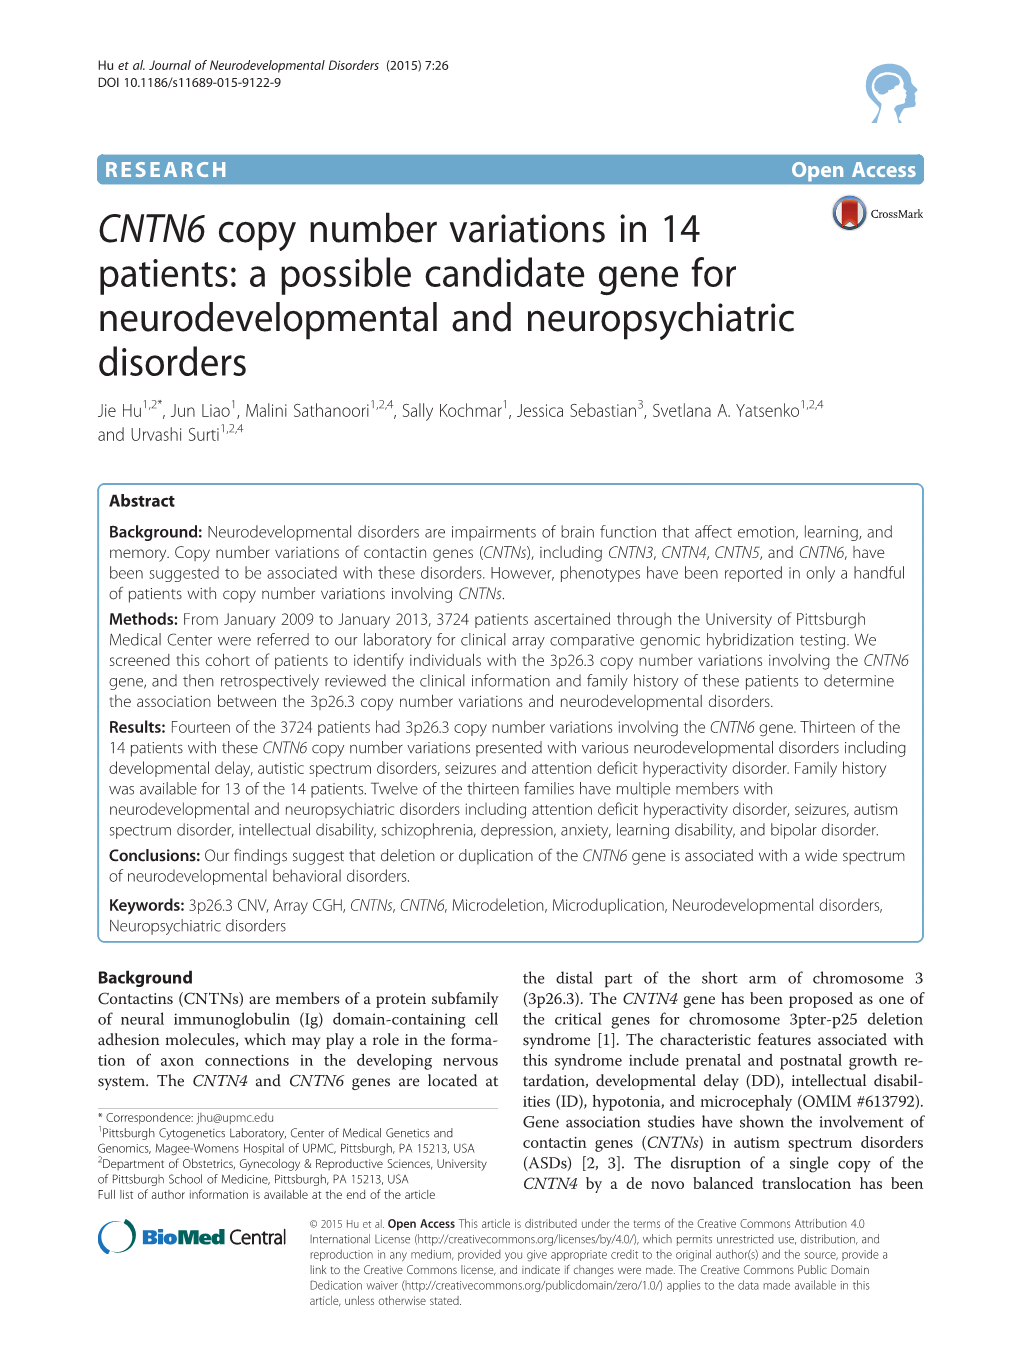 CNTN6 Copy Number Variations in 14 Patients: a Possible Candidate Gene